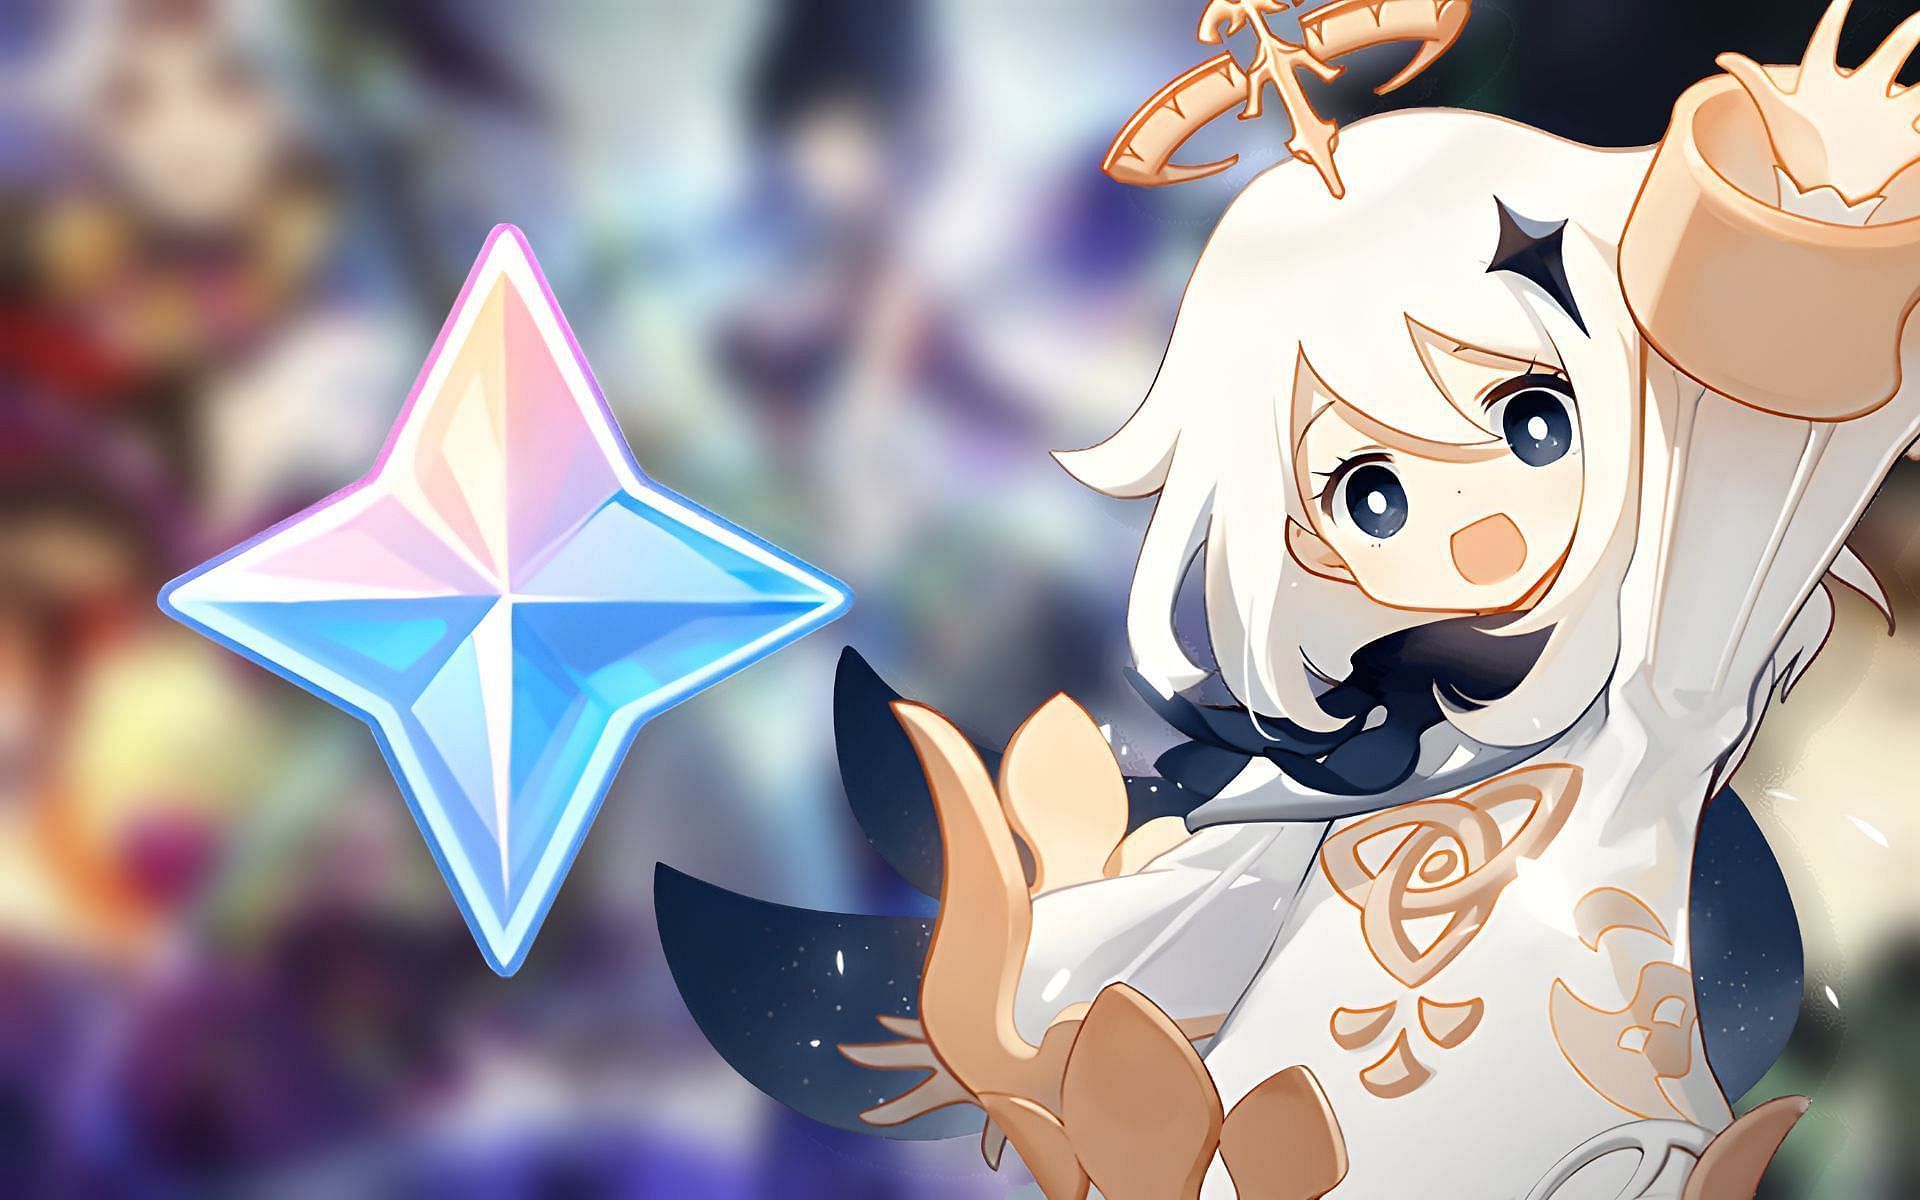 Genshin Impact Partners with Discord for Primogems and Nitro!